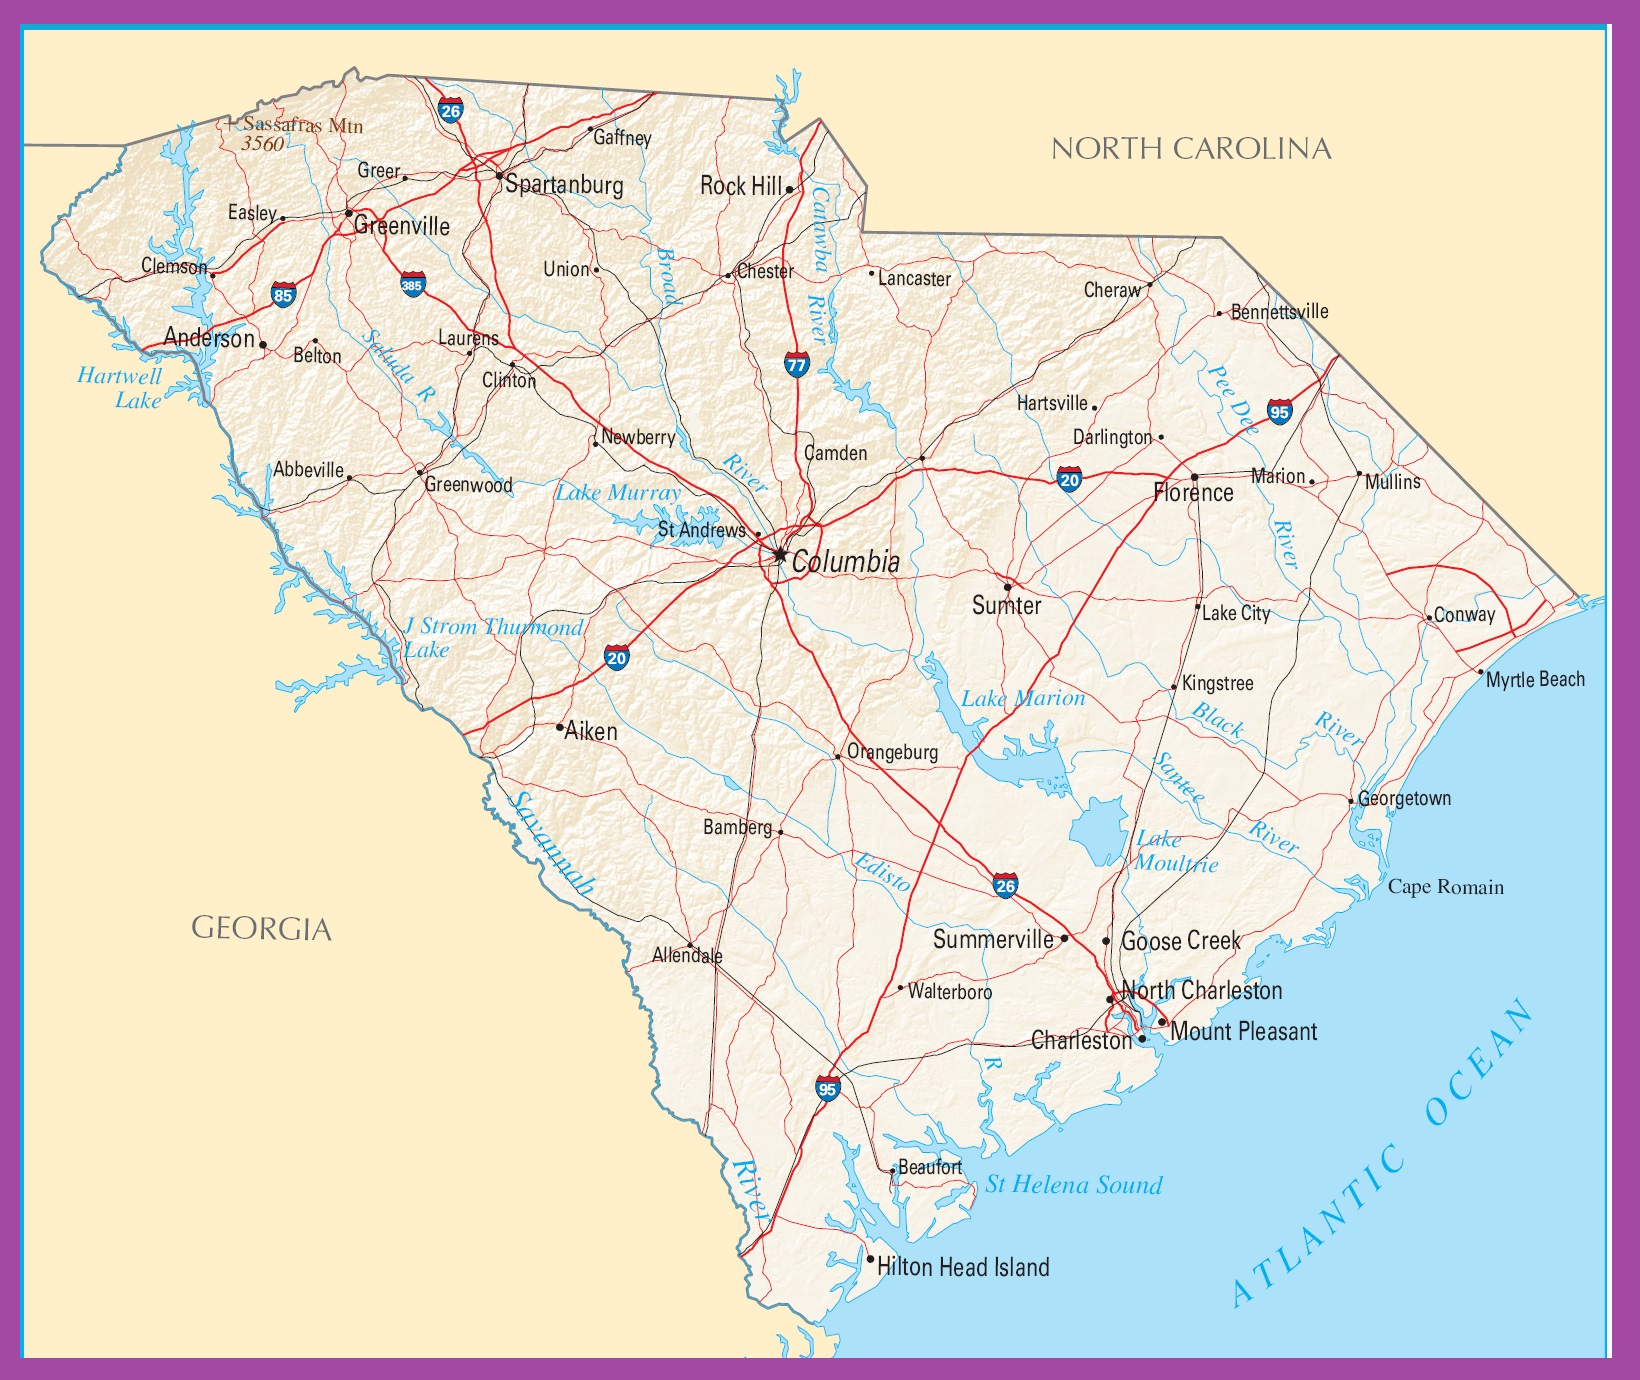 South Carolina Political Map | Large Printable High Resolution and Standard Map